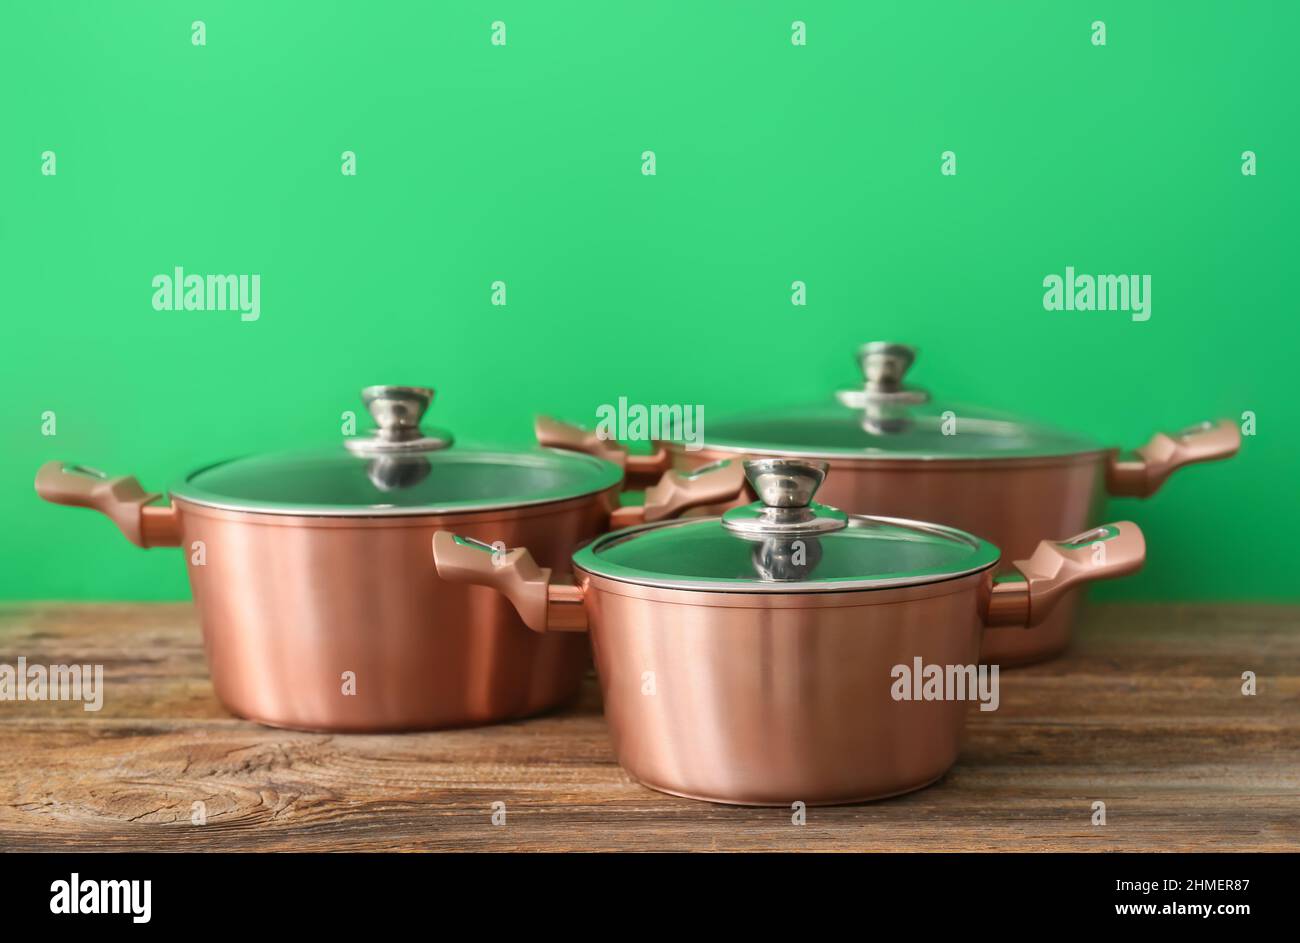 https://c8.alamy.com/comp/2HMER87/copper-cooking-pots-on-wooden-table-against-green-background-2HMER87.jpg